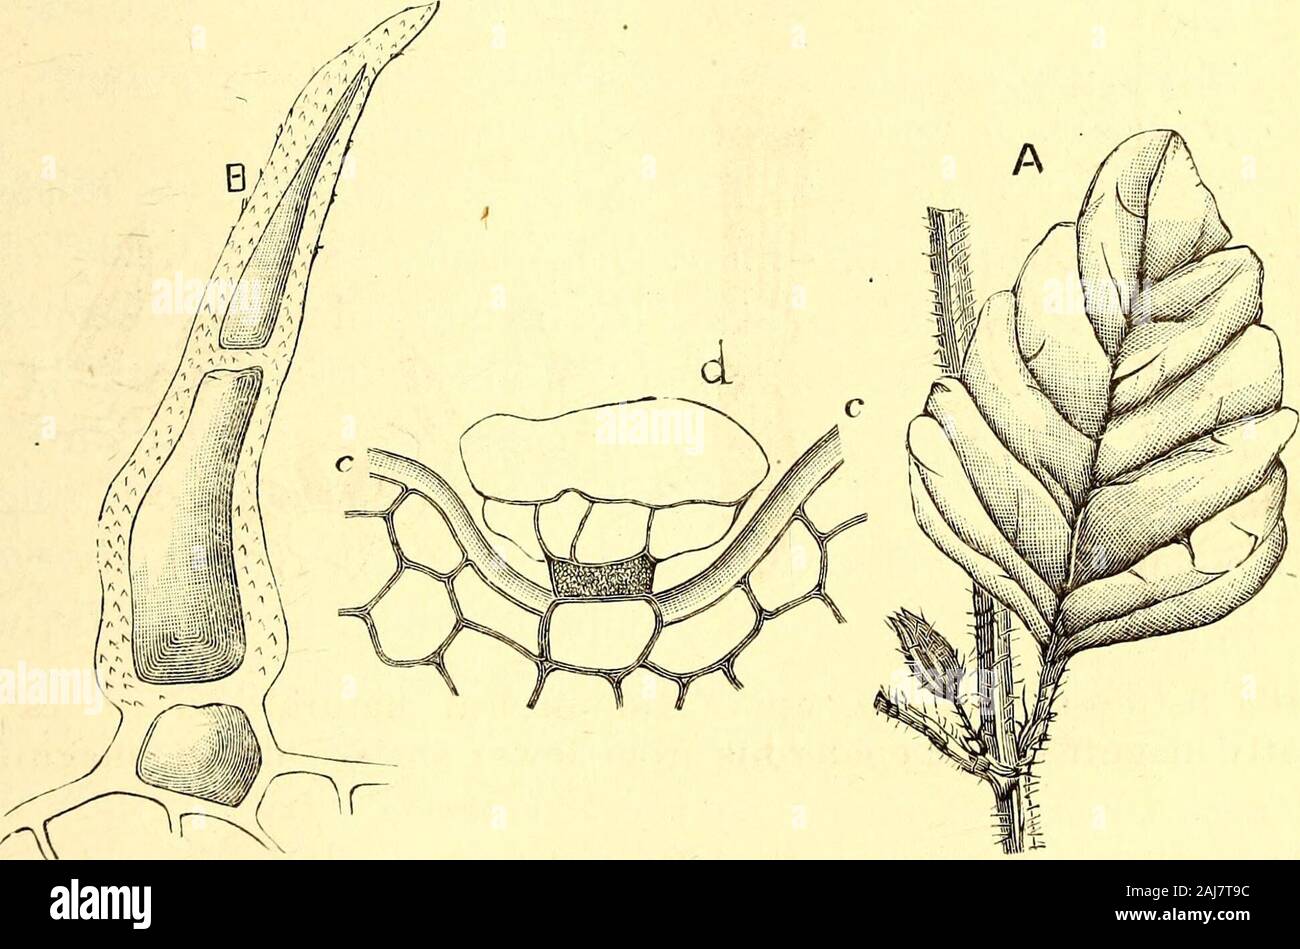 American journal of pharmacy . .matic—Dr. J. Moeller in Ph. Centralhalle, No. 29. Am. Jour. Pharm.Sept., 1882. Gleanings in Materia Medica. 461 Micromeria Douglasii, Benth.^ known as yerha buena, a lal)iateplant of Northern California and Columbia^ has been recommended asan anthelmintic, emmenagogue and febrifuge. The drug is describedby Dr. J. Moeller as consisting of quadrangular hairy stems. Theleaves are opposite, ovate, short-petiolate, obtnse, coarsely crenate, viththe nerve branches running to the margin, and with sparse tertiarybranches; the upper side almost smooth, the lower surface Stock Photo